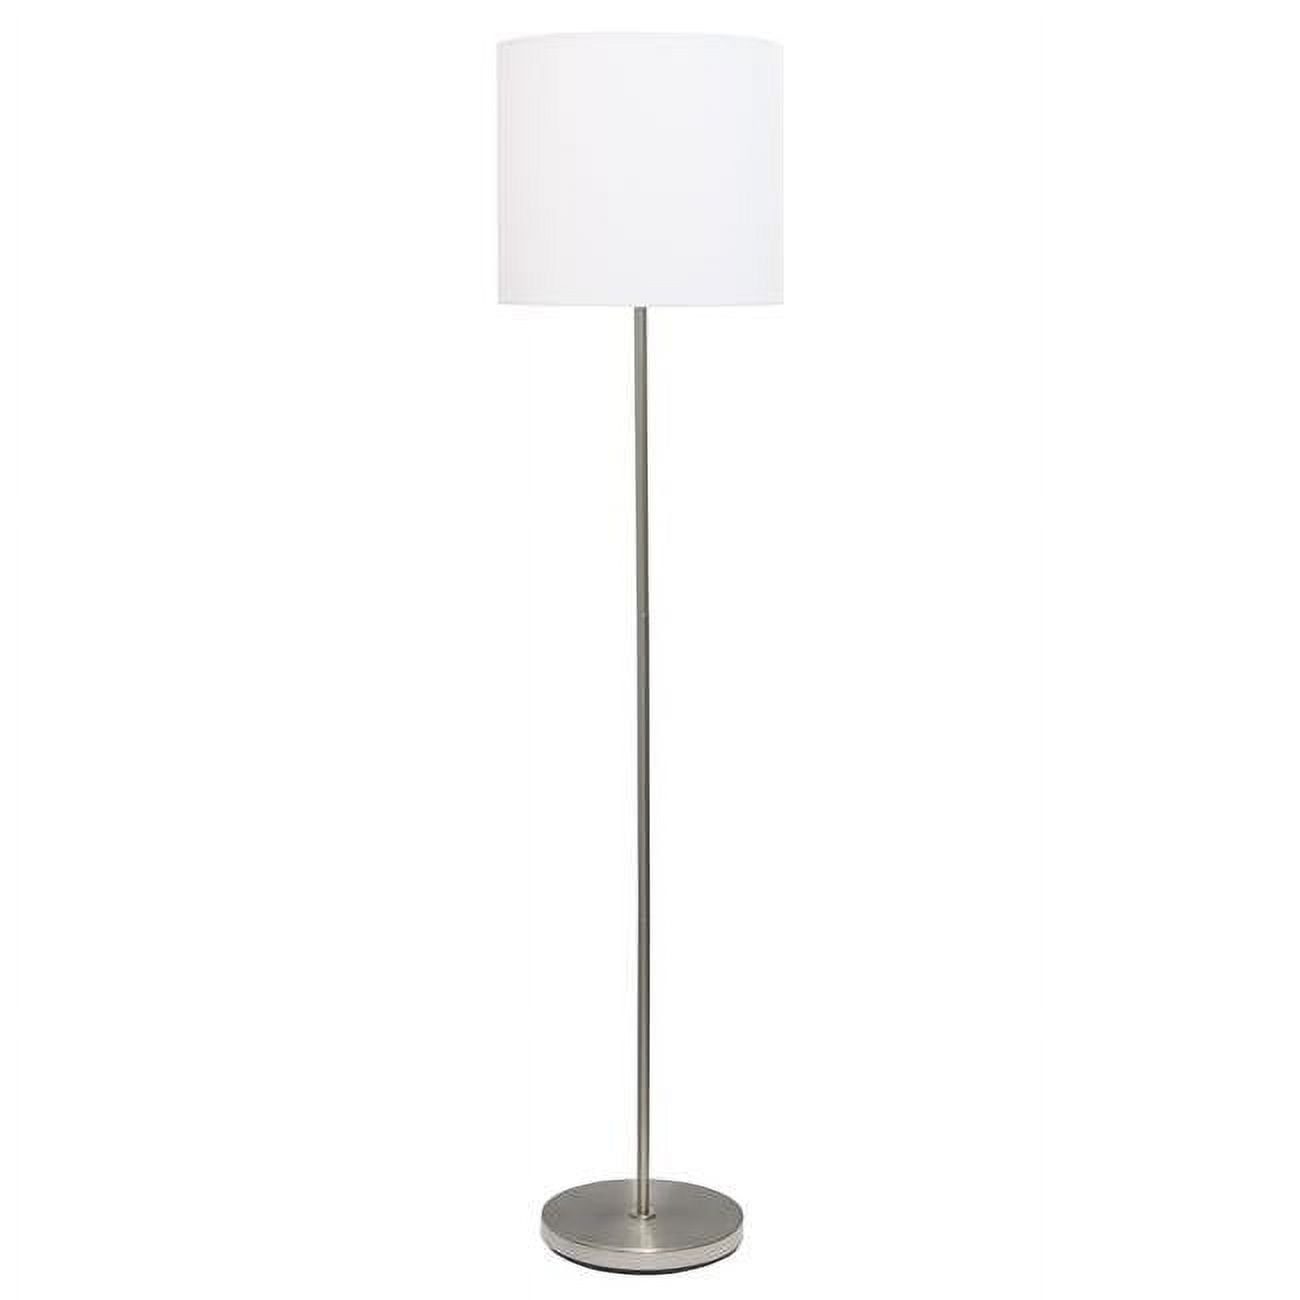 Alltherages Lf2004-wht Brushed Nickel Drum Shade Floor Lamp, White